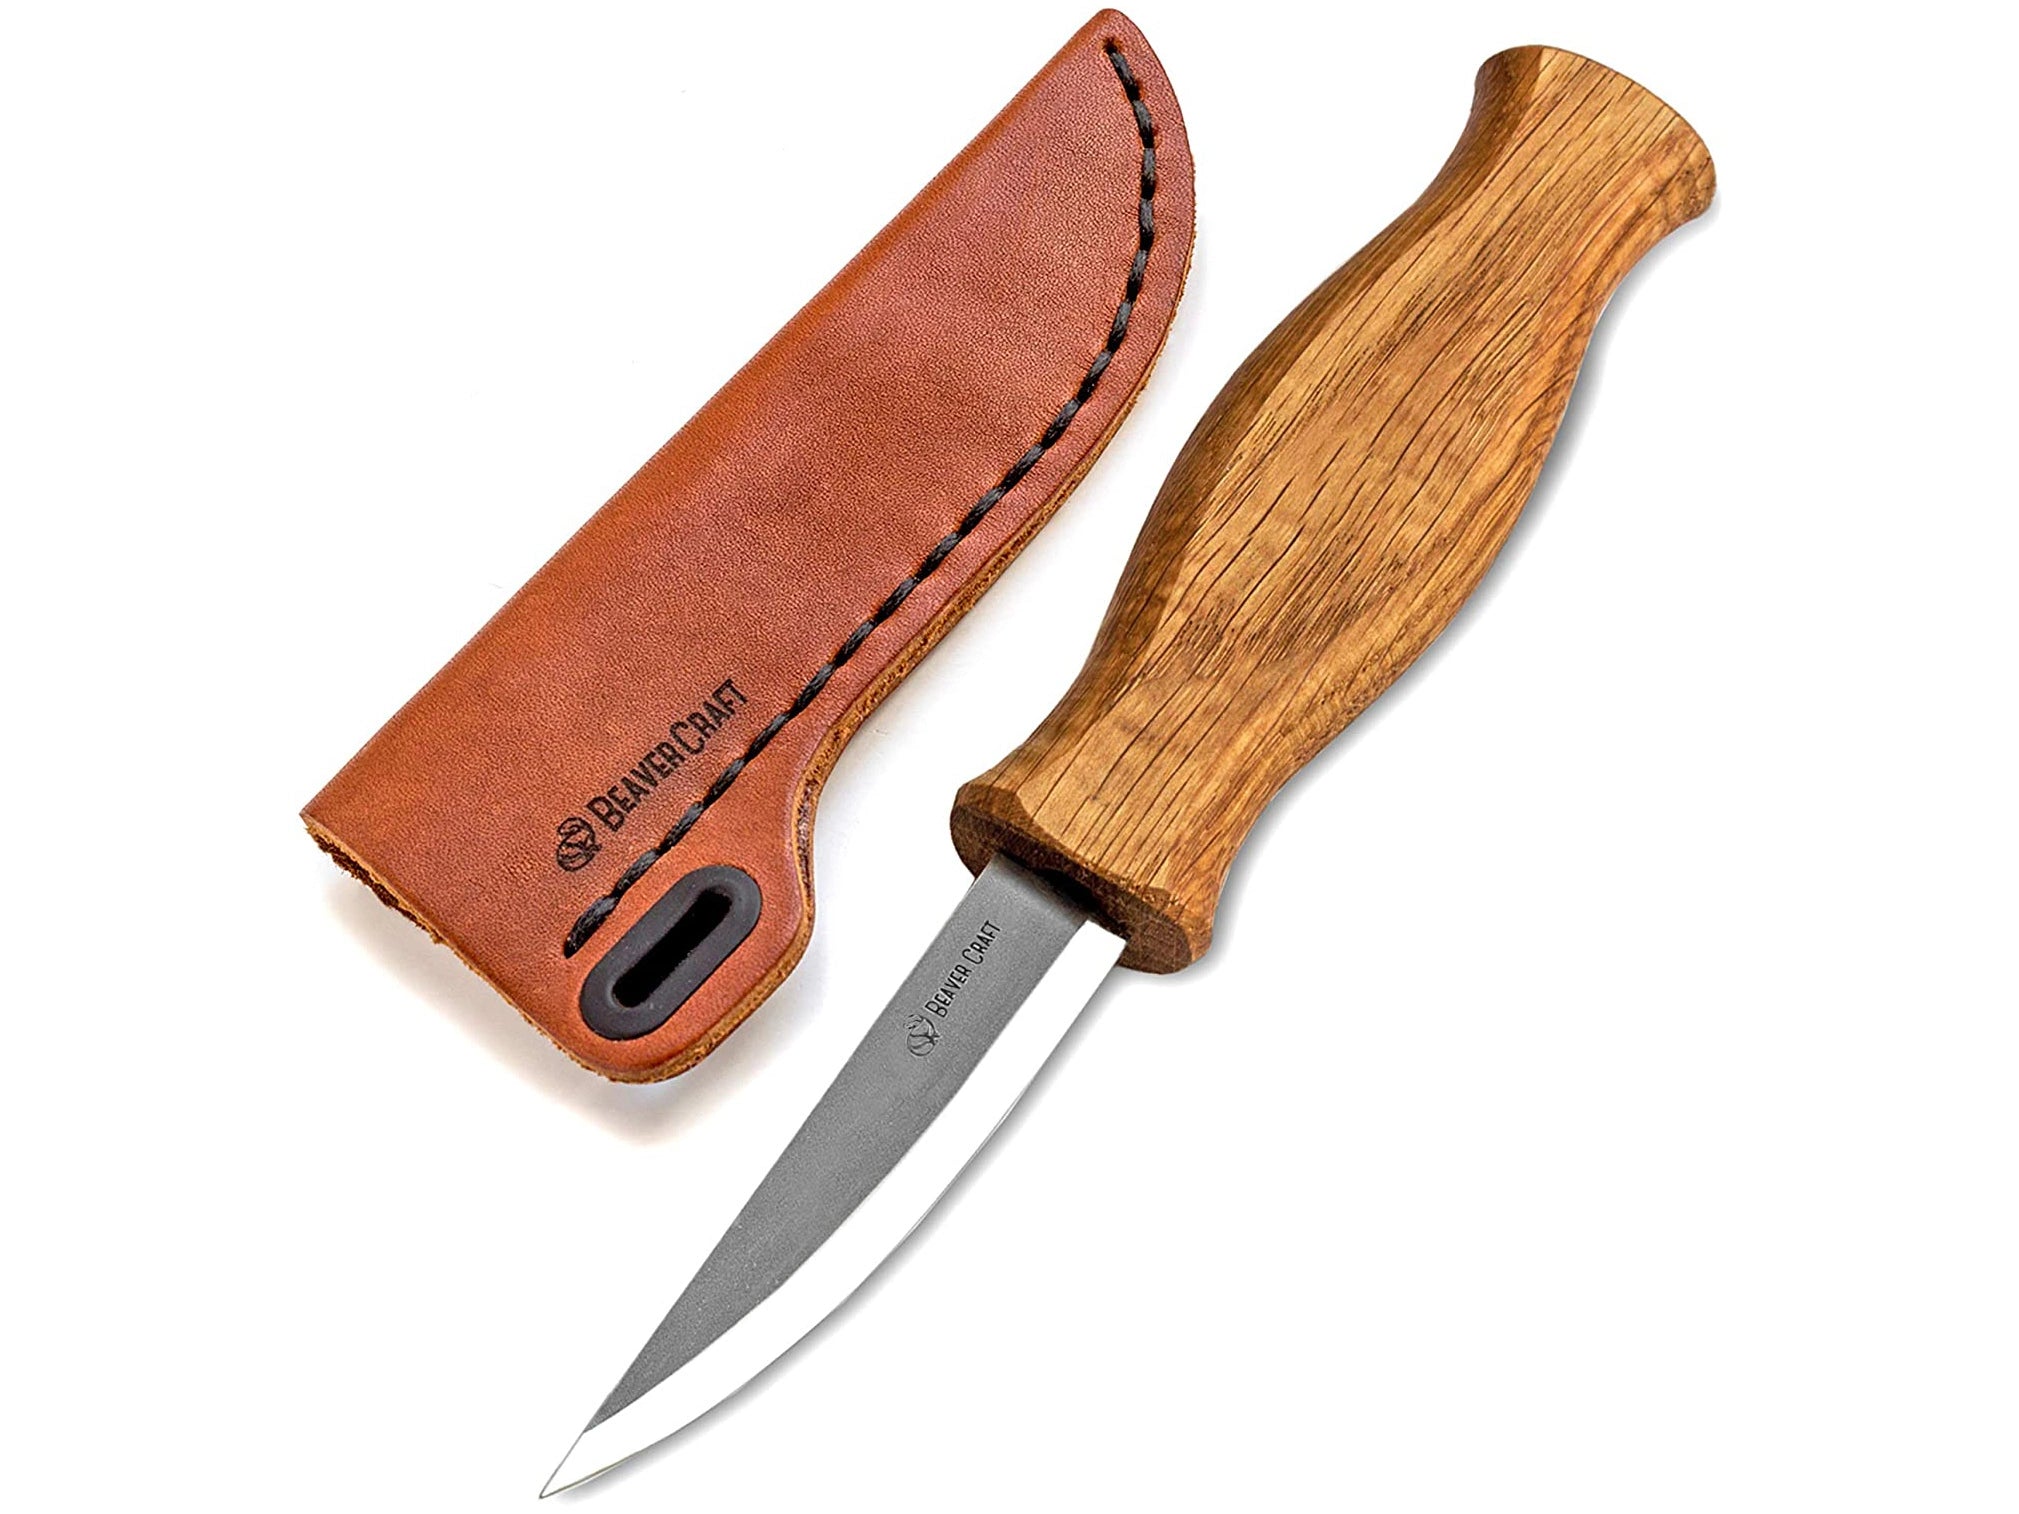  BeaverCraft DK2s Draw Knife with Leather Sheath Woodworking  Tool 4.3 Drawknife Wood Carving Tools Wood Draw Knife Woodworking  Whittling Tools : Tools & Home Improvement